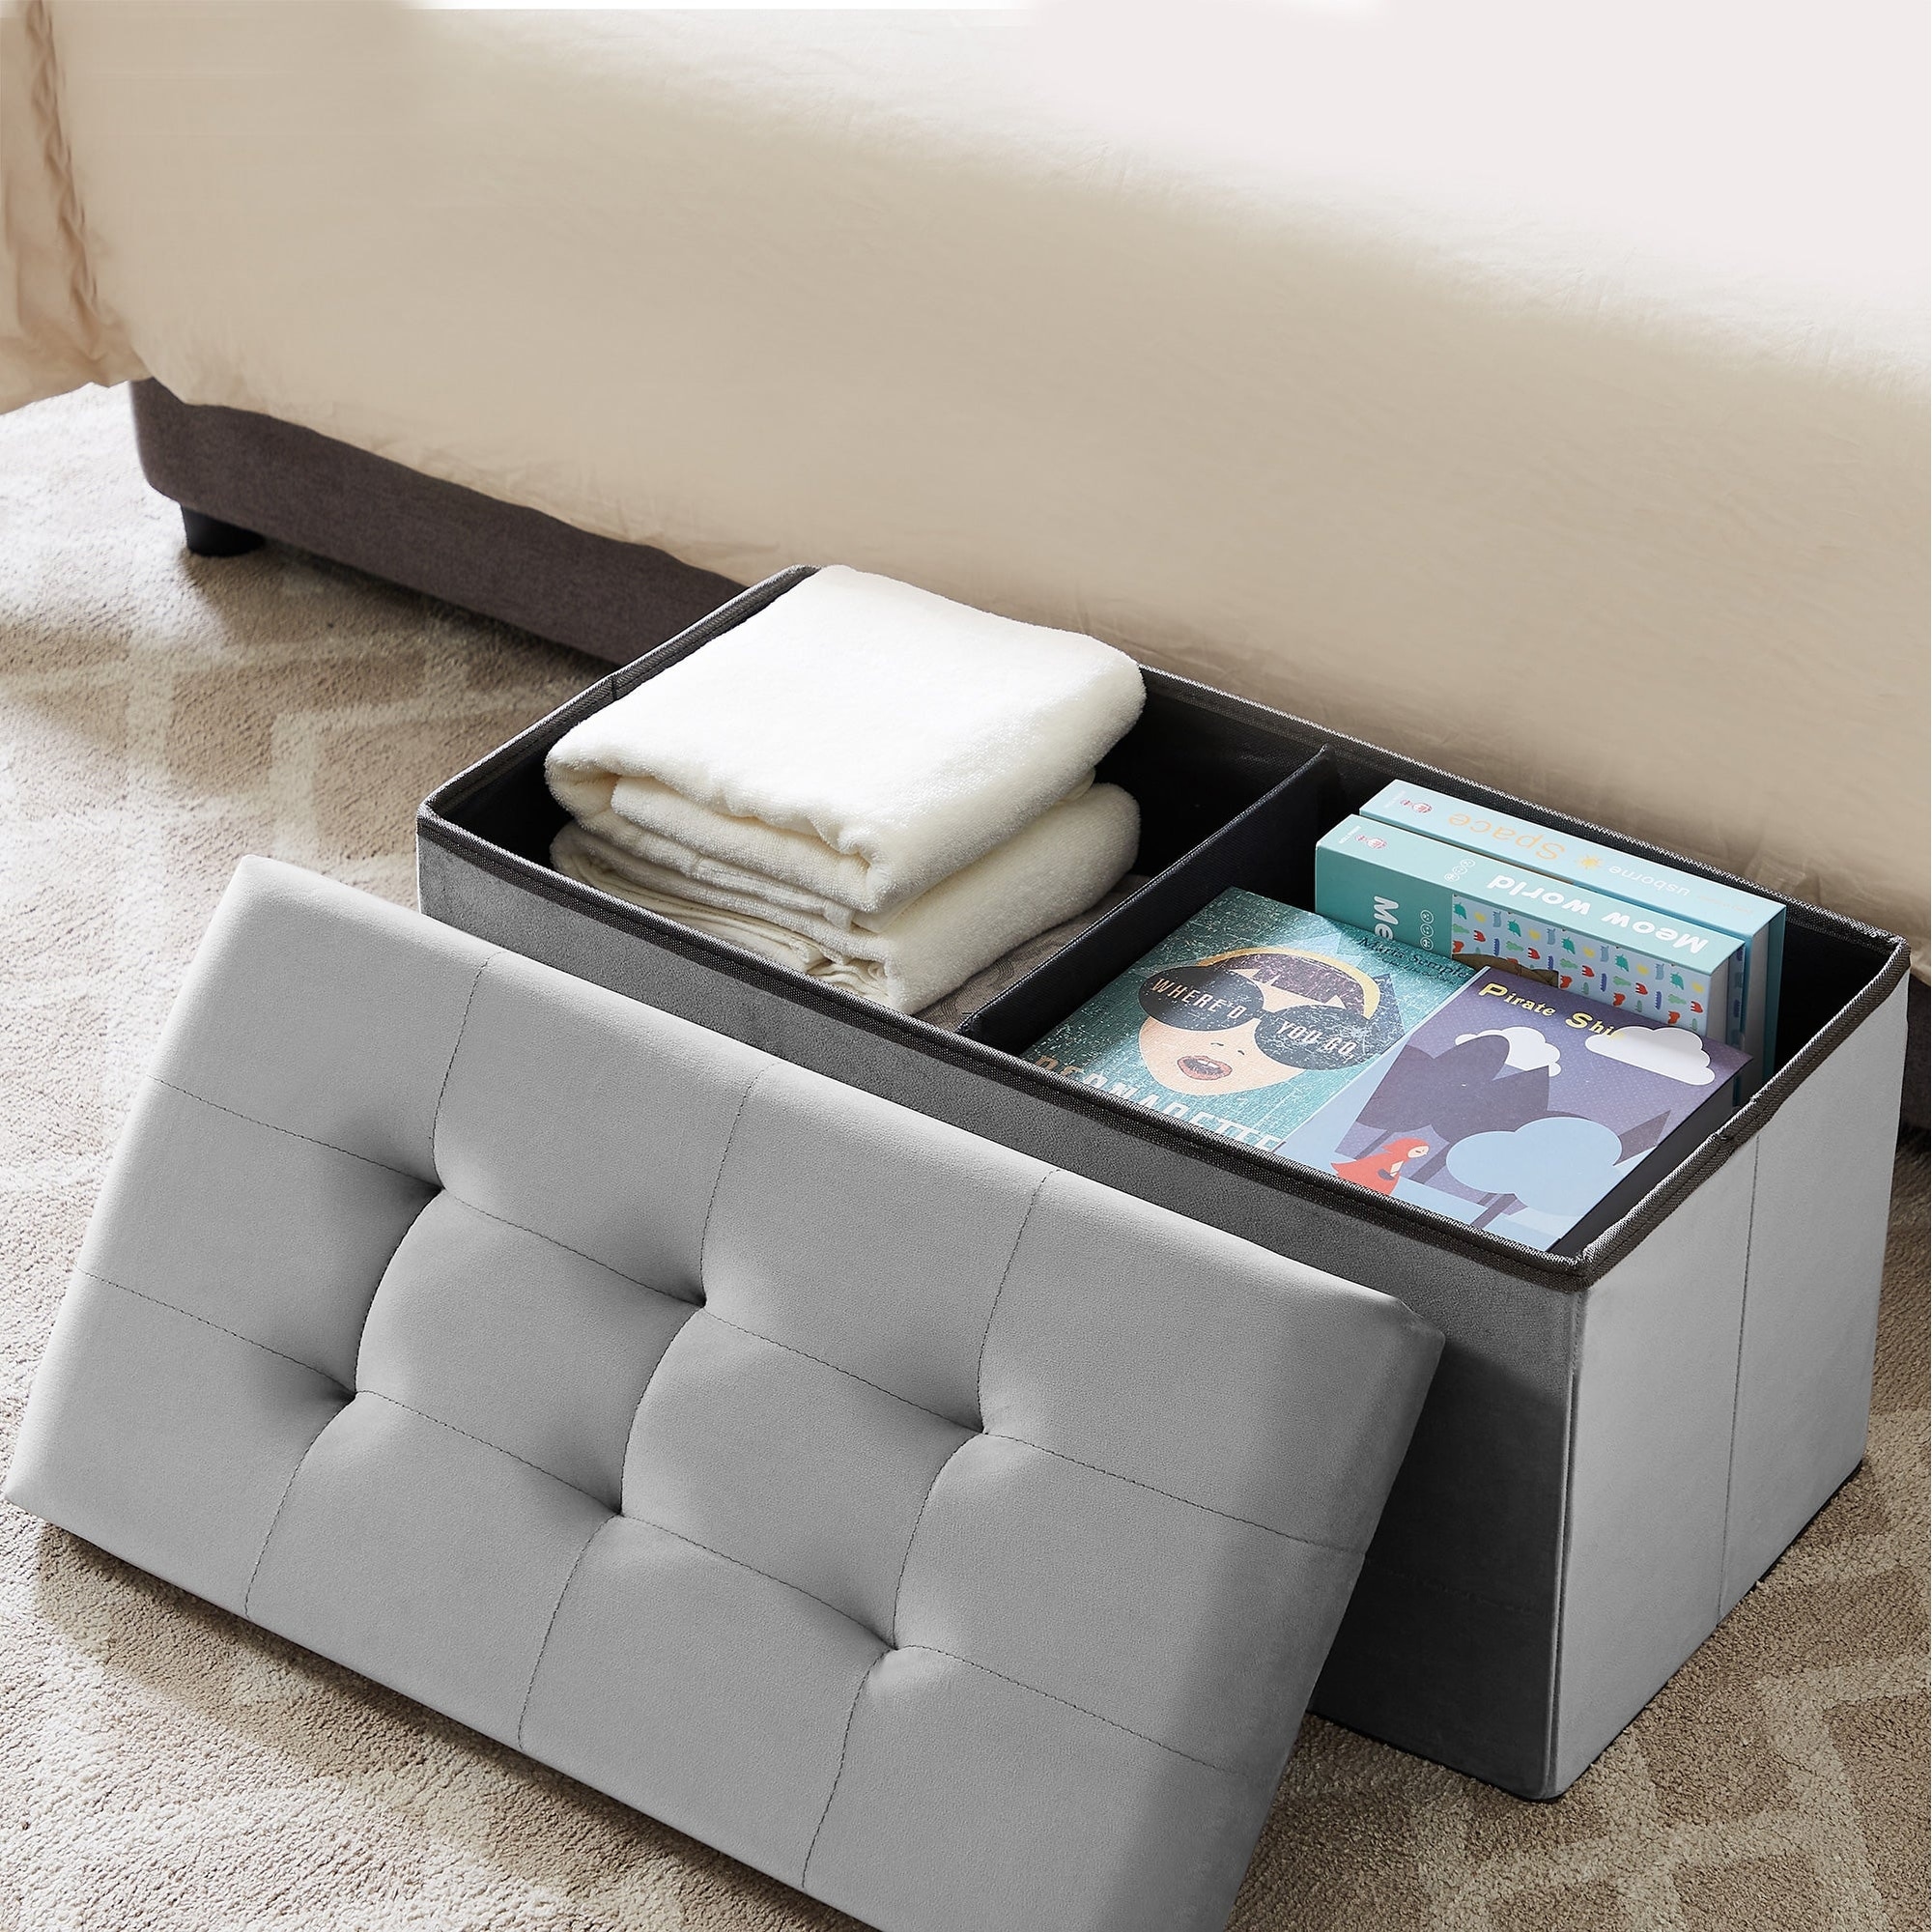 https://ak1.ostkcdn.com/images/products/is/images/direct/a237565b6faf7a749f1e751ba6c8fb6eb3f19d03/VECELO-Modern-Folding-Tufted-Rectangular-Storage-Ottoman.jpg